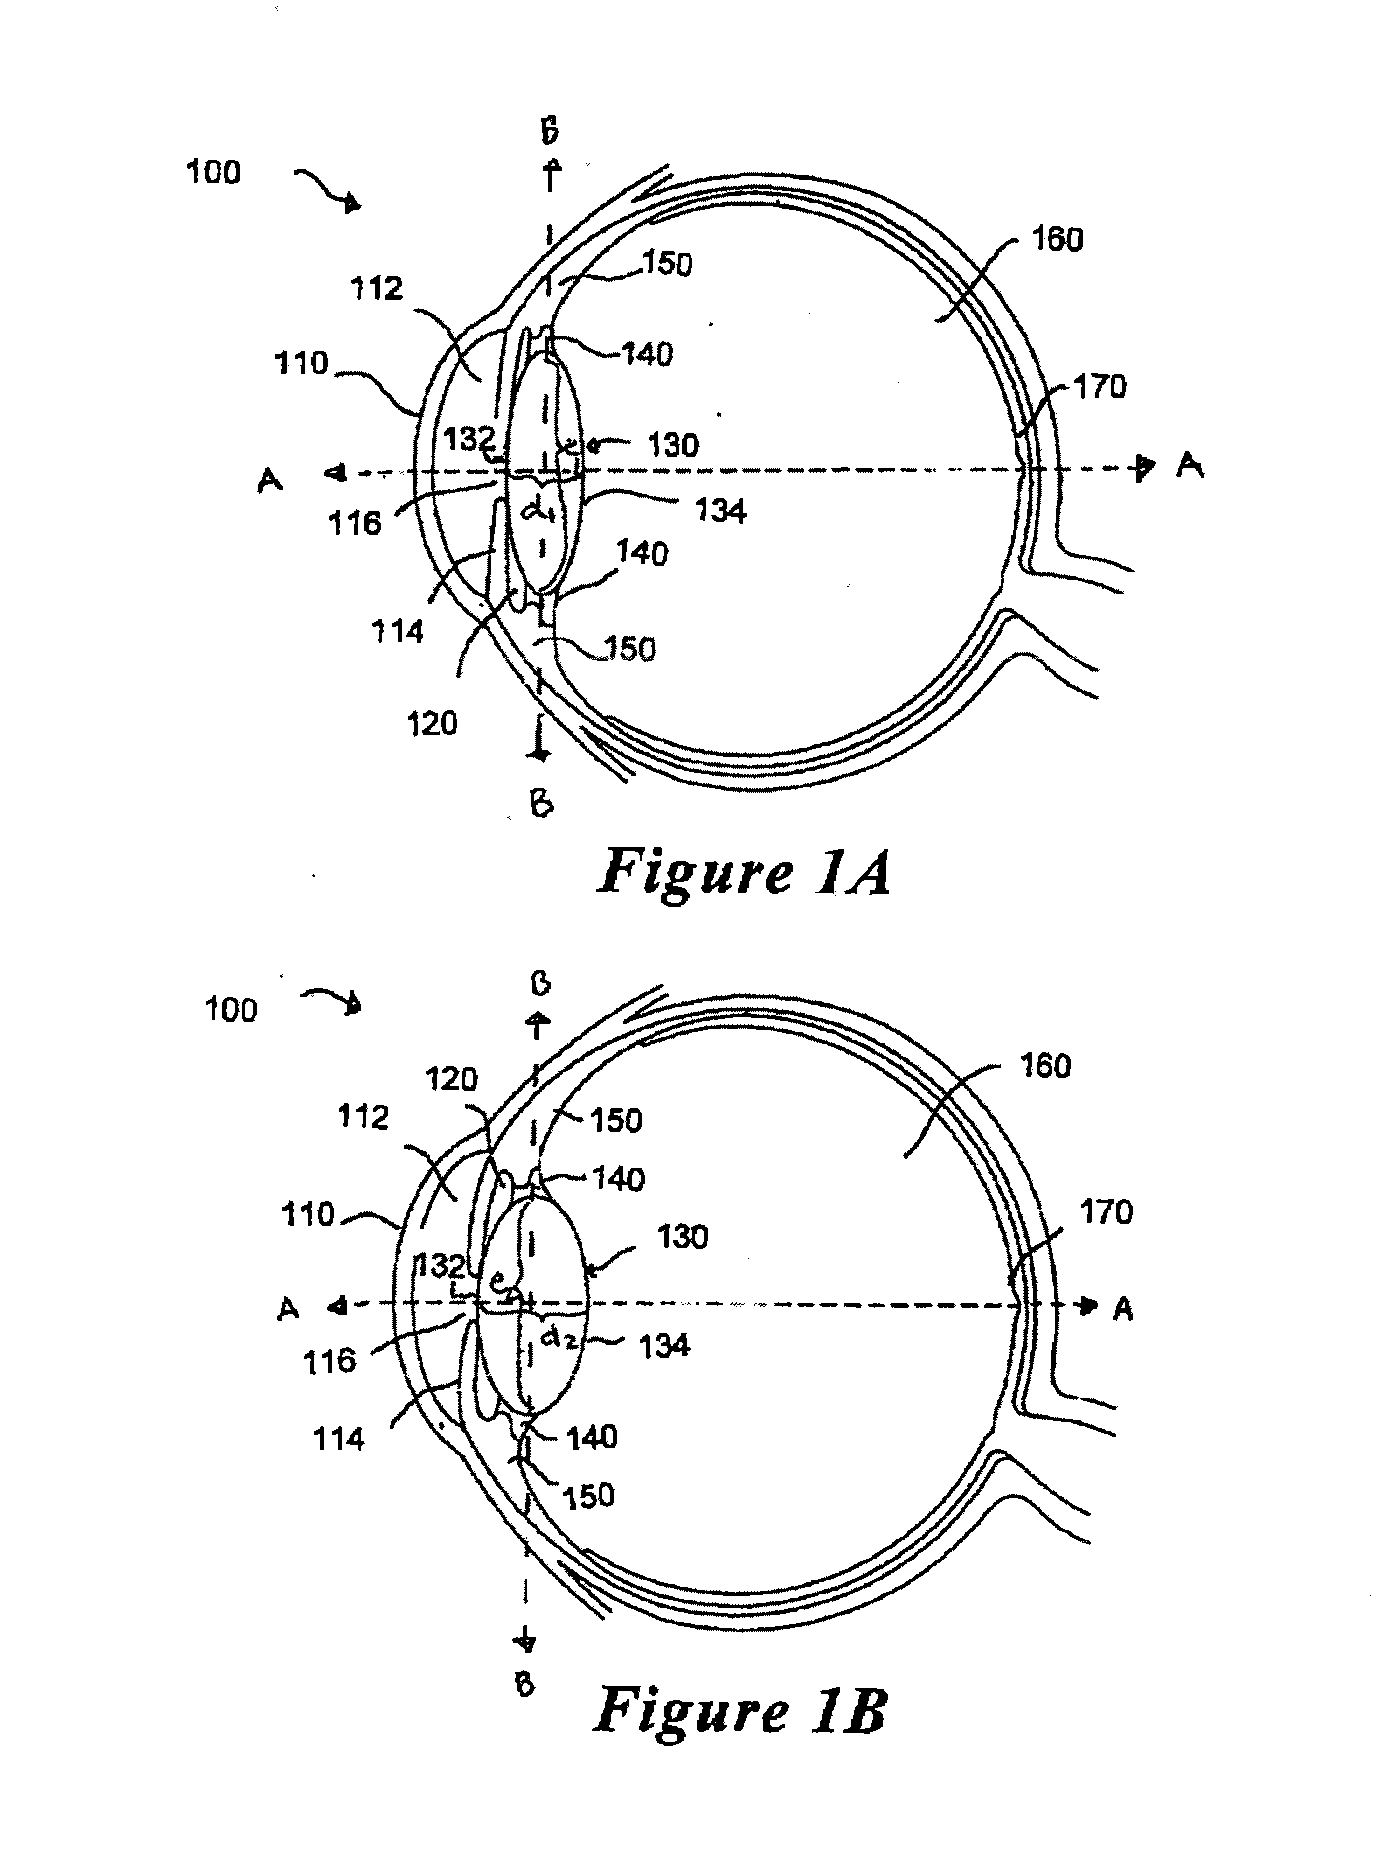 Method and system for adjusting the refractive power of an implanted intraocular lens